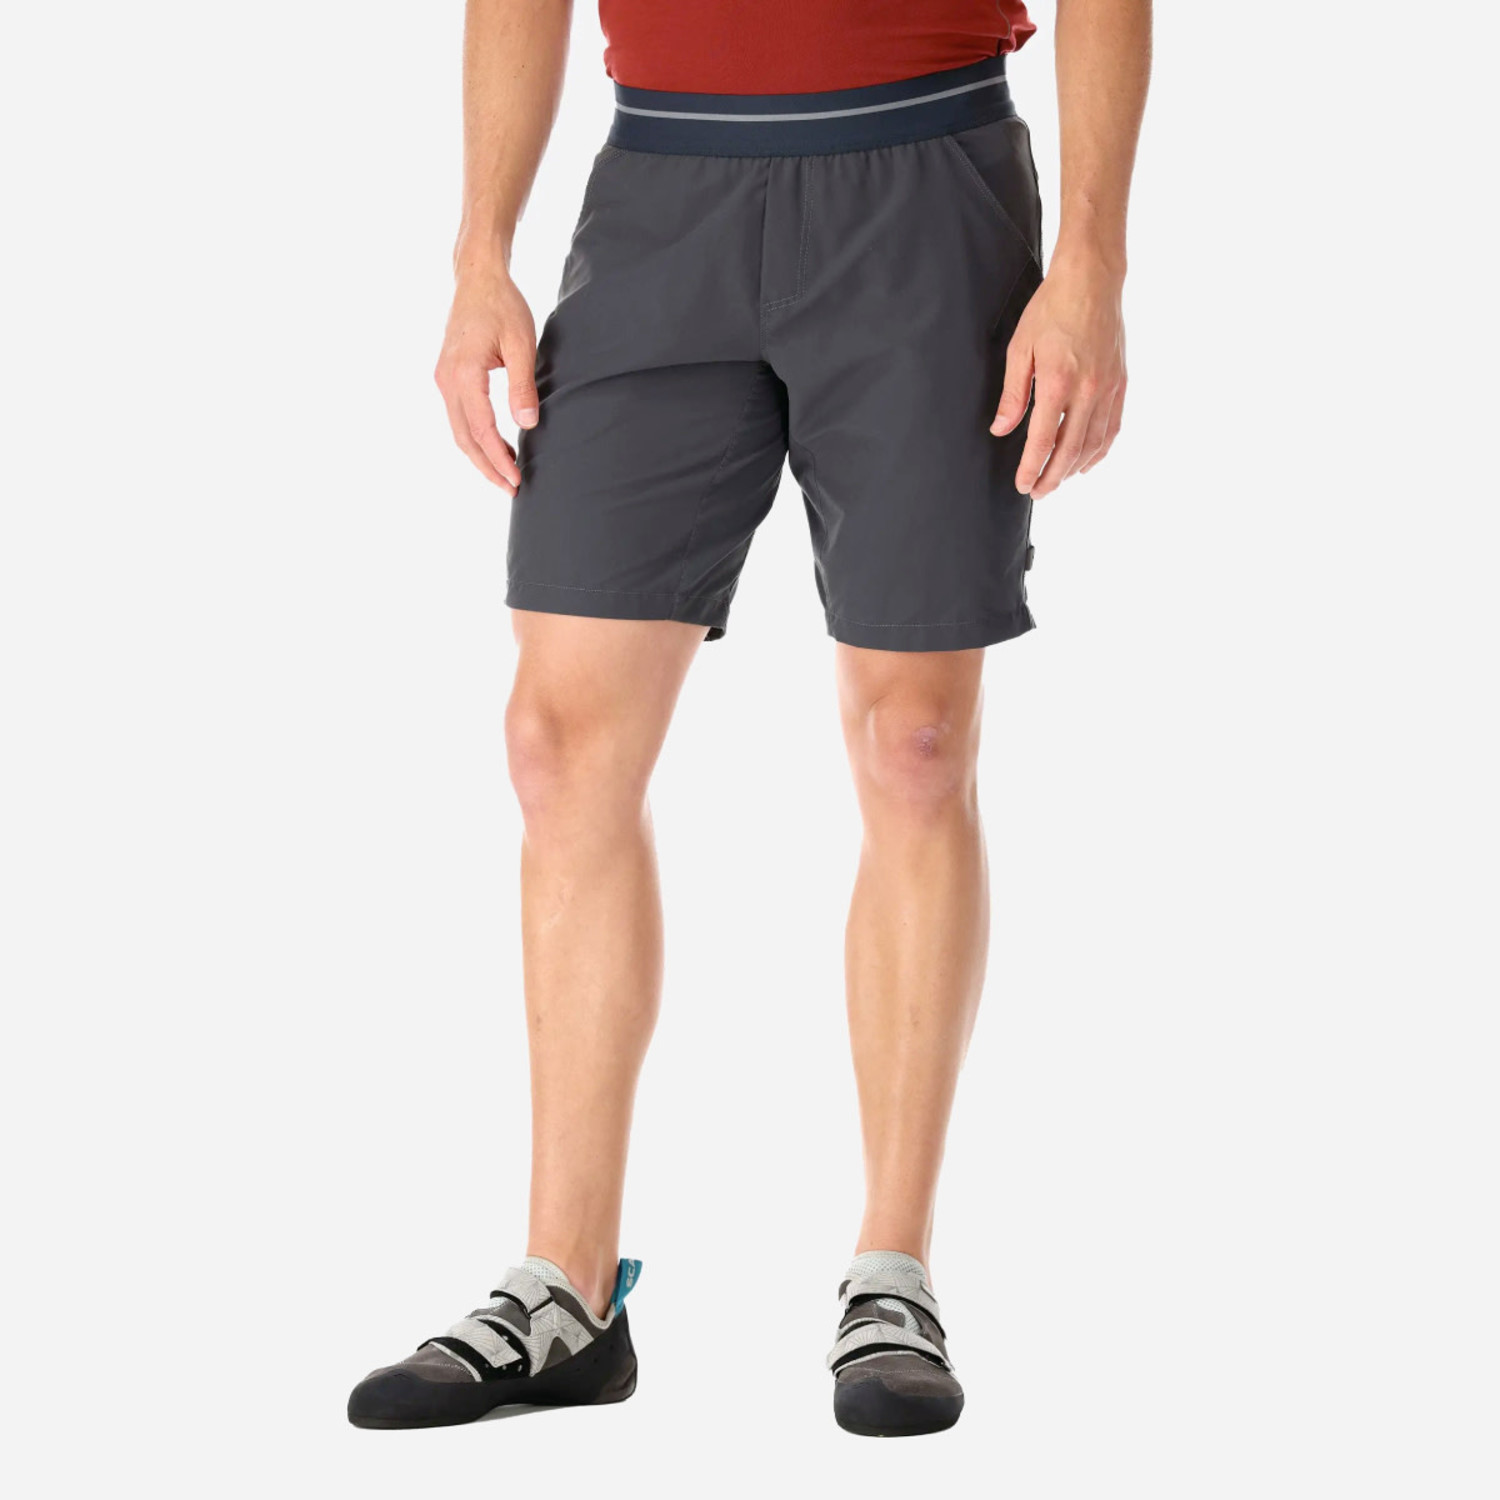 Rab Obtuse Shorts, 10 Inseam - Mens, FREE SHIPPING in Canada